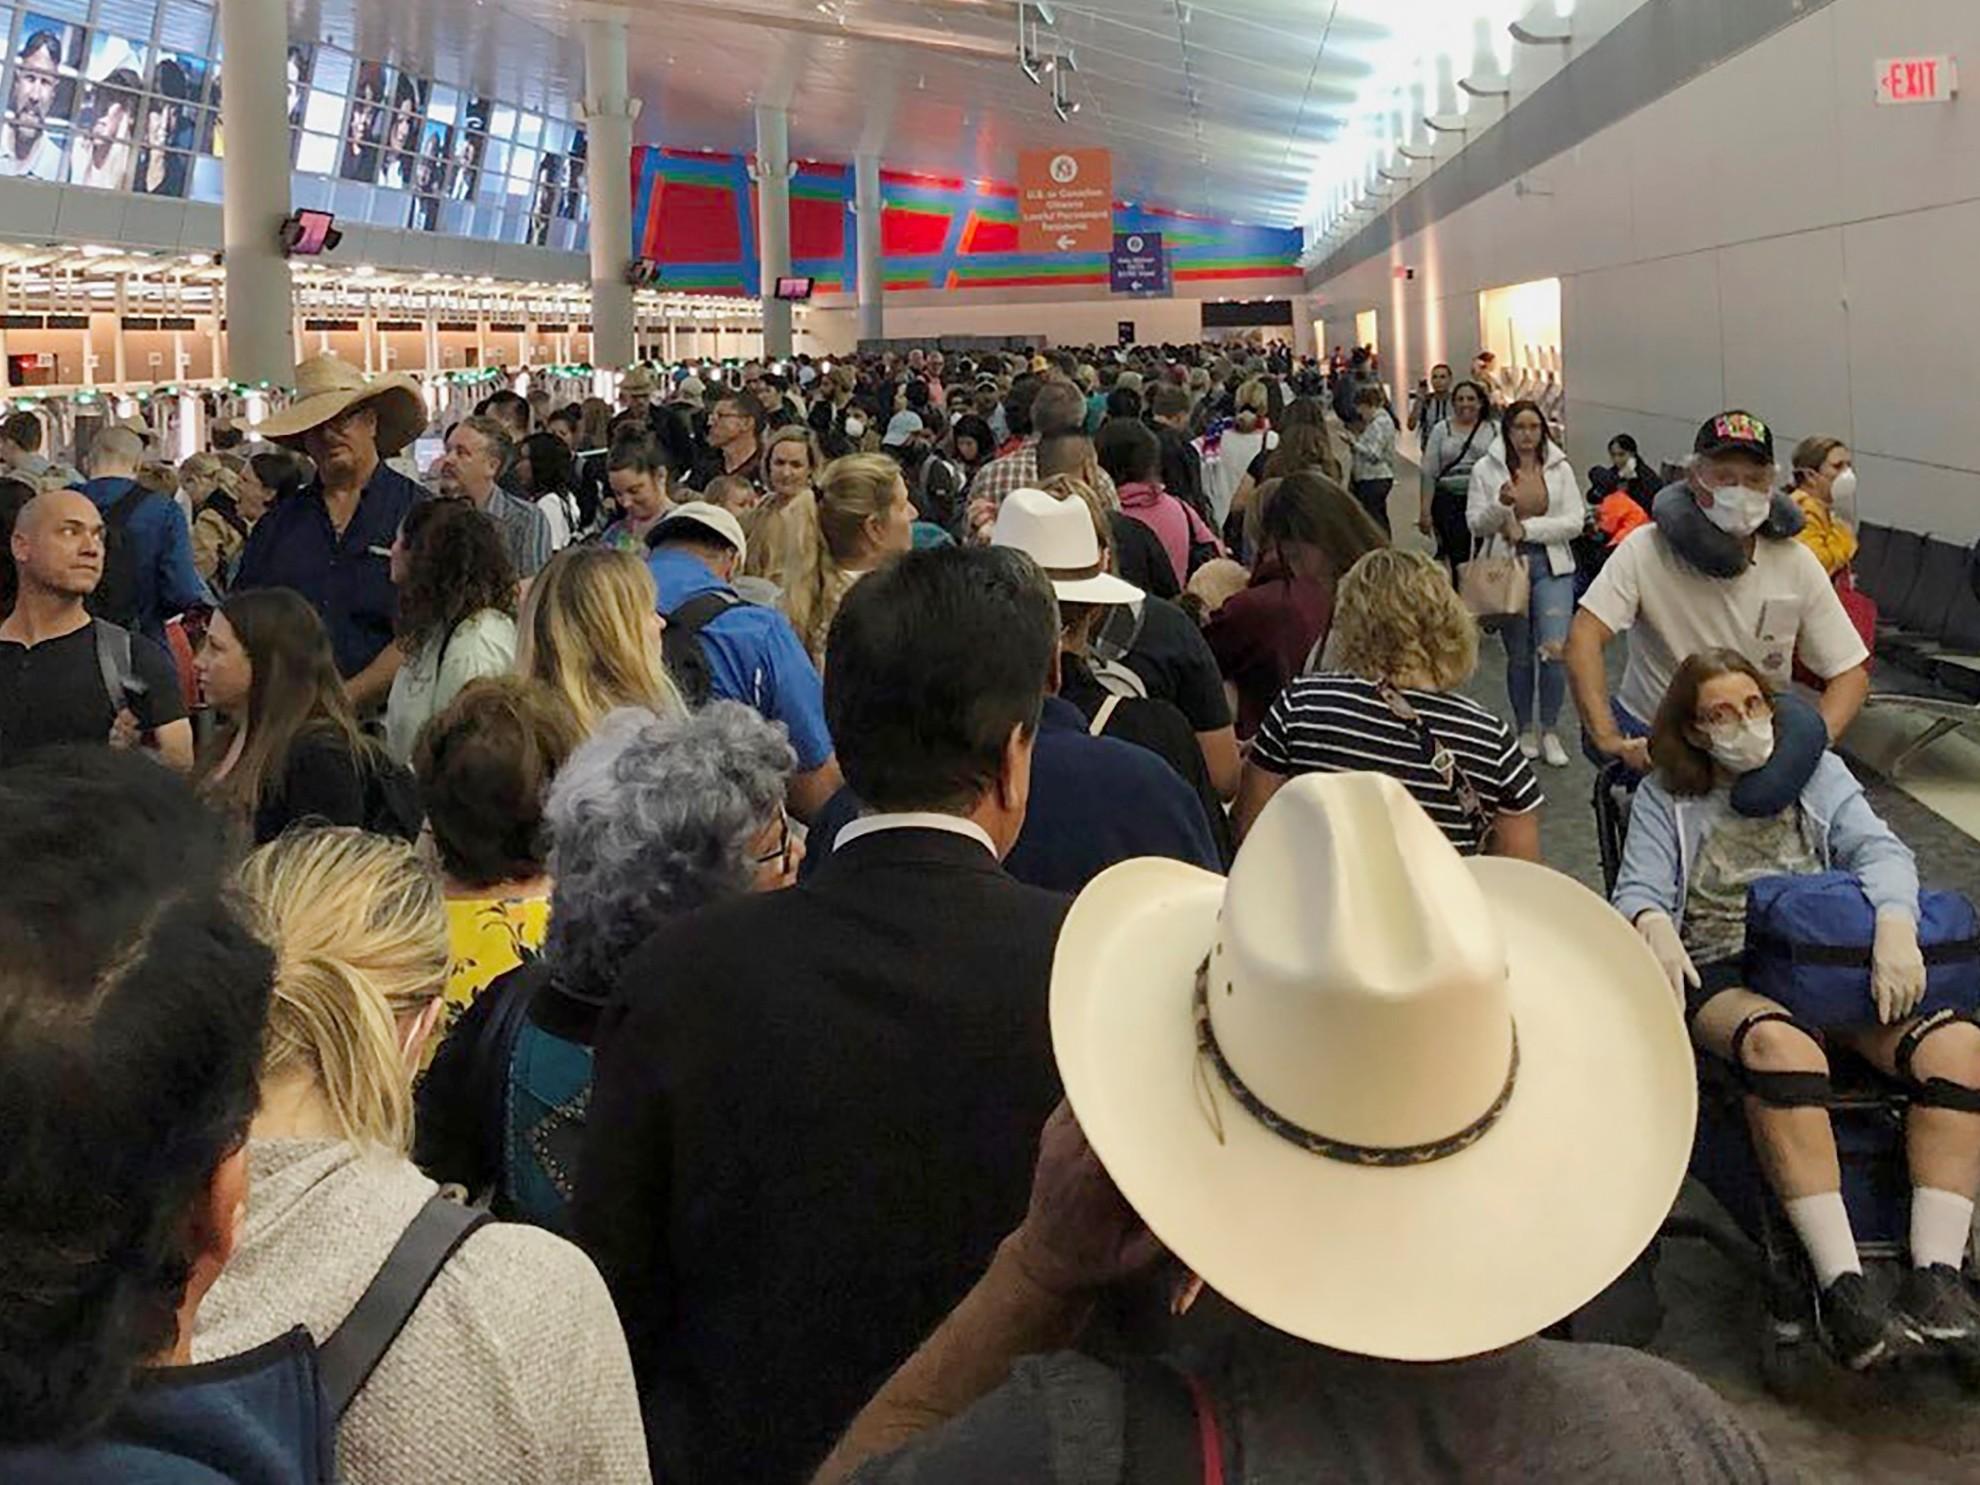 Travelers Greeted With HoursLong Airport Lines As Coronavirus